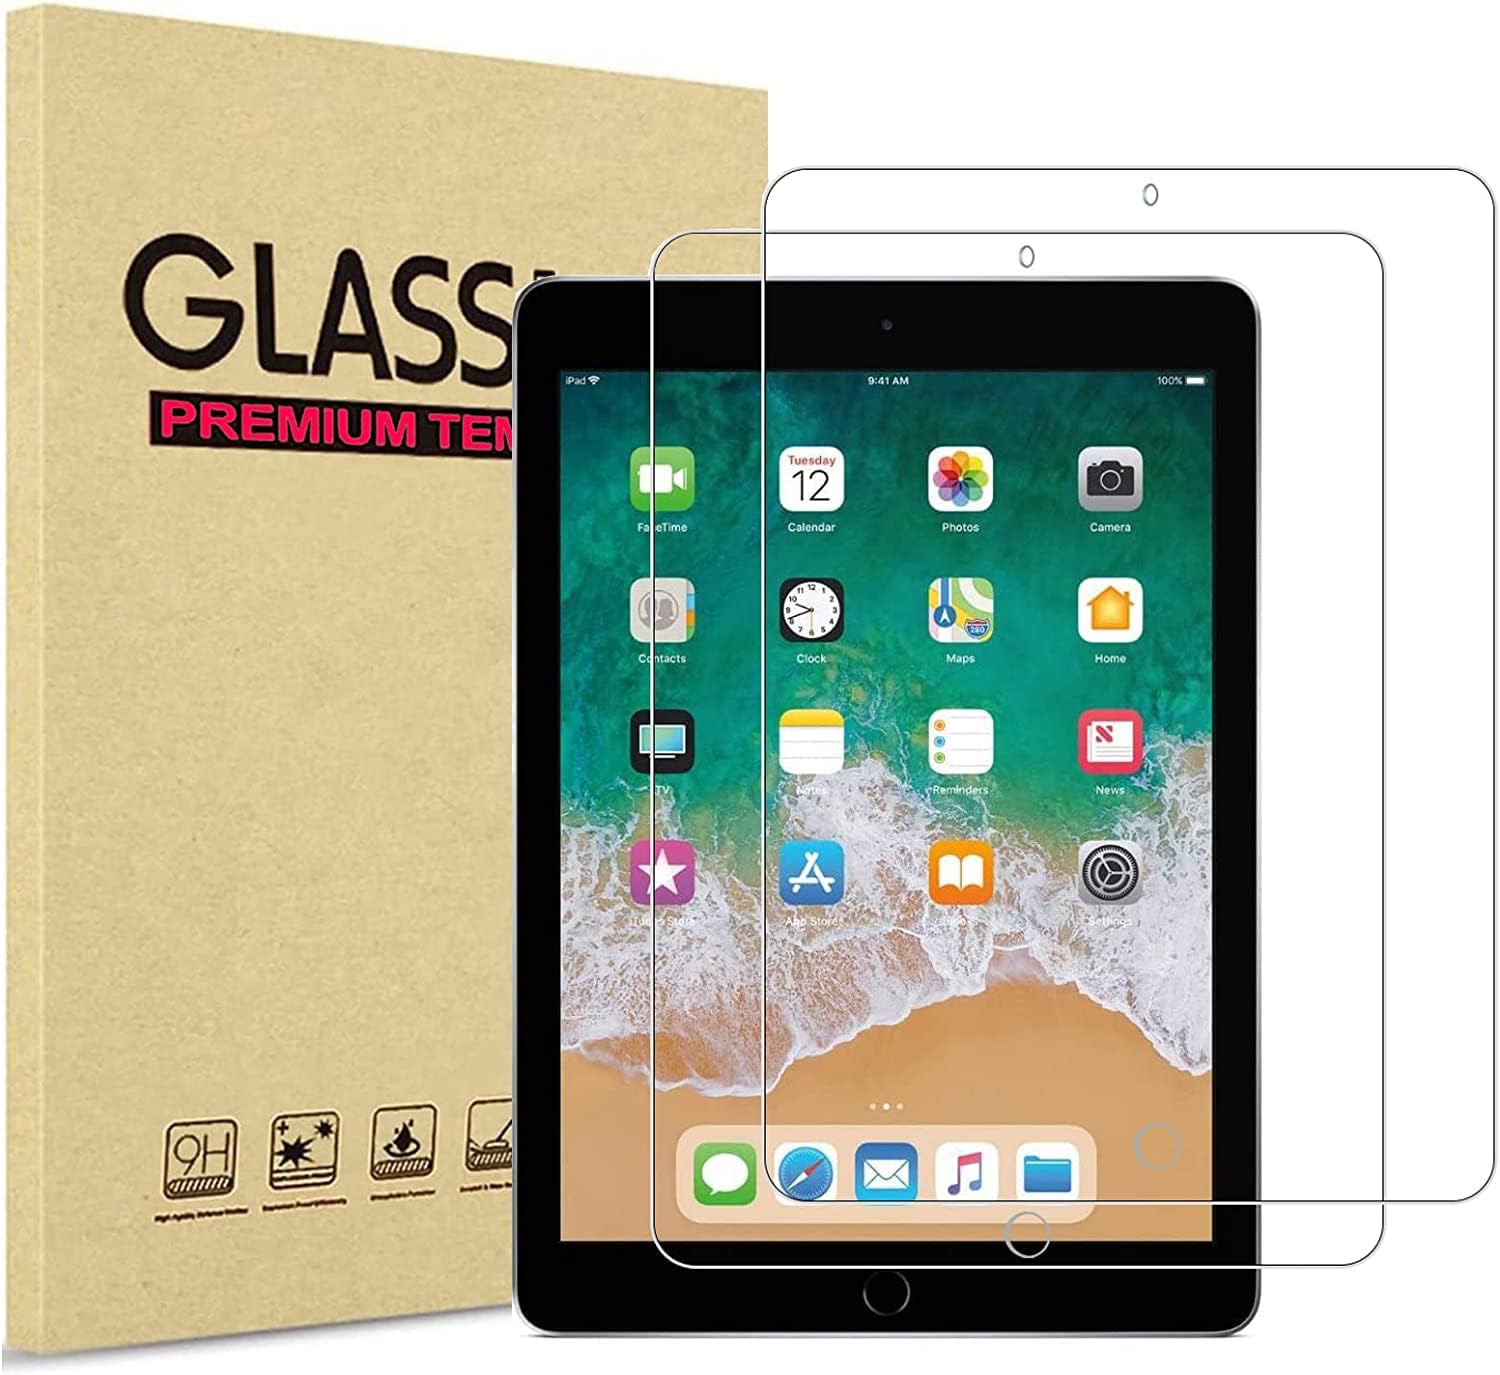 Premium Tempered Glass Screen Protector for iPad 9.7 Inch, iPad 6, iPad 5, iPad Air, iPad Air 2 & iPad Pro 9.7 *Free Shipping*